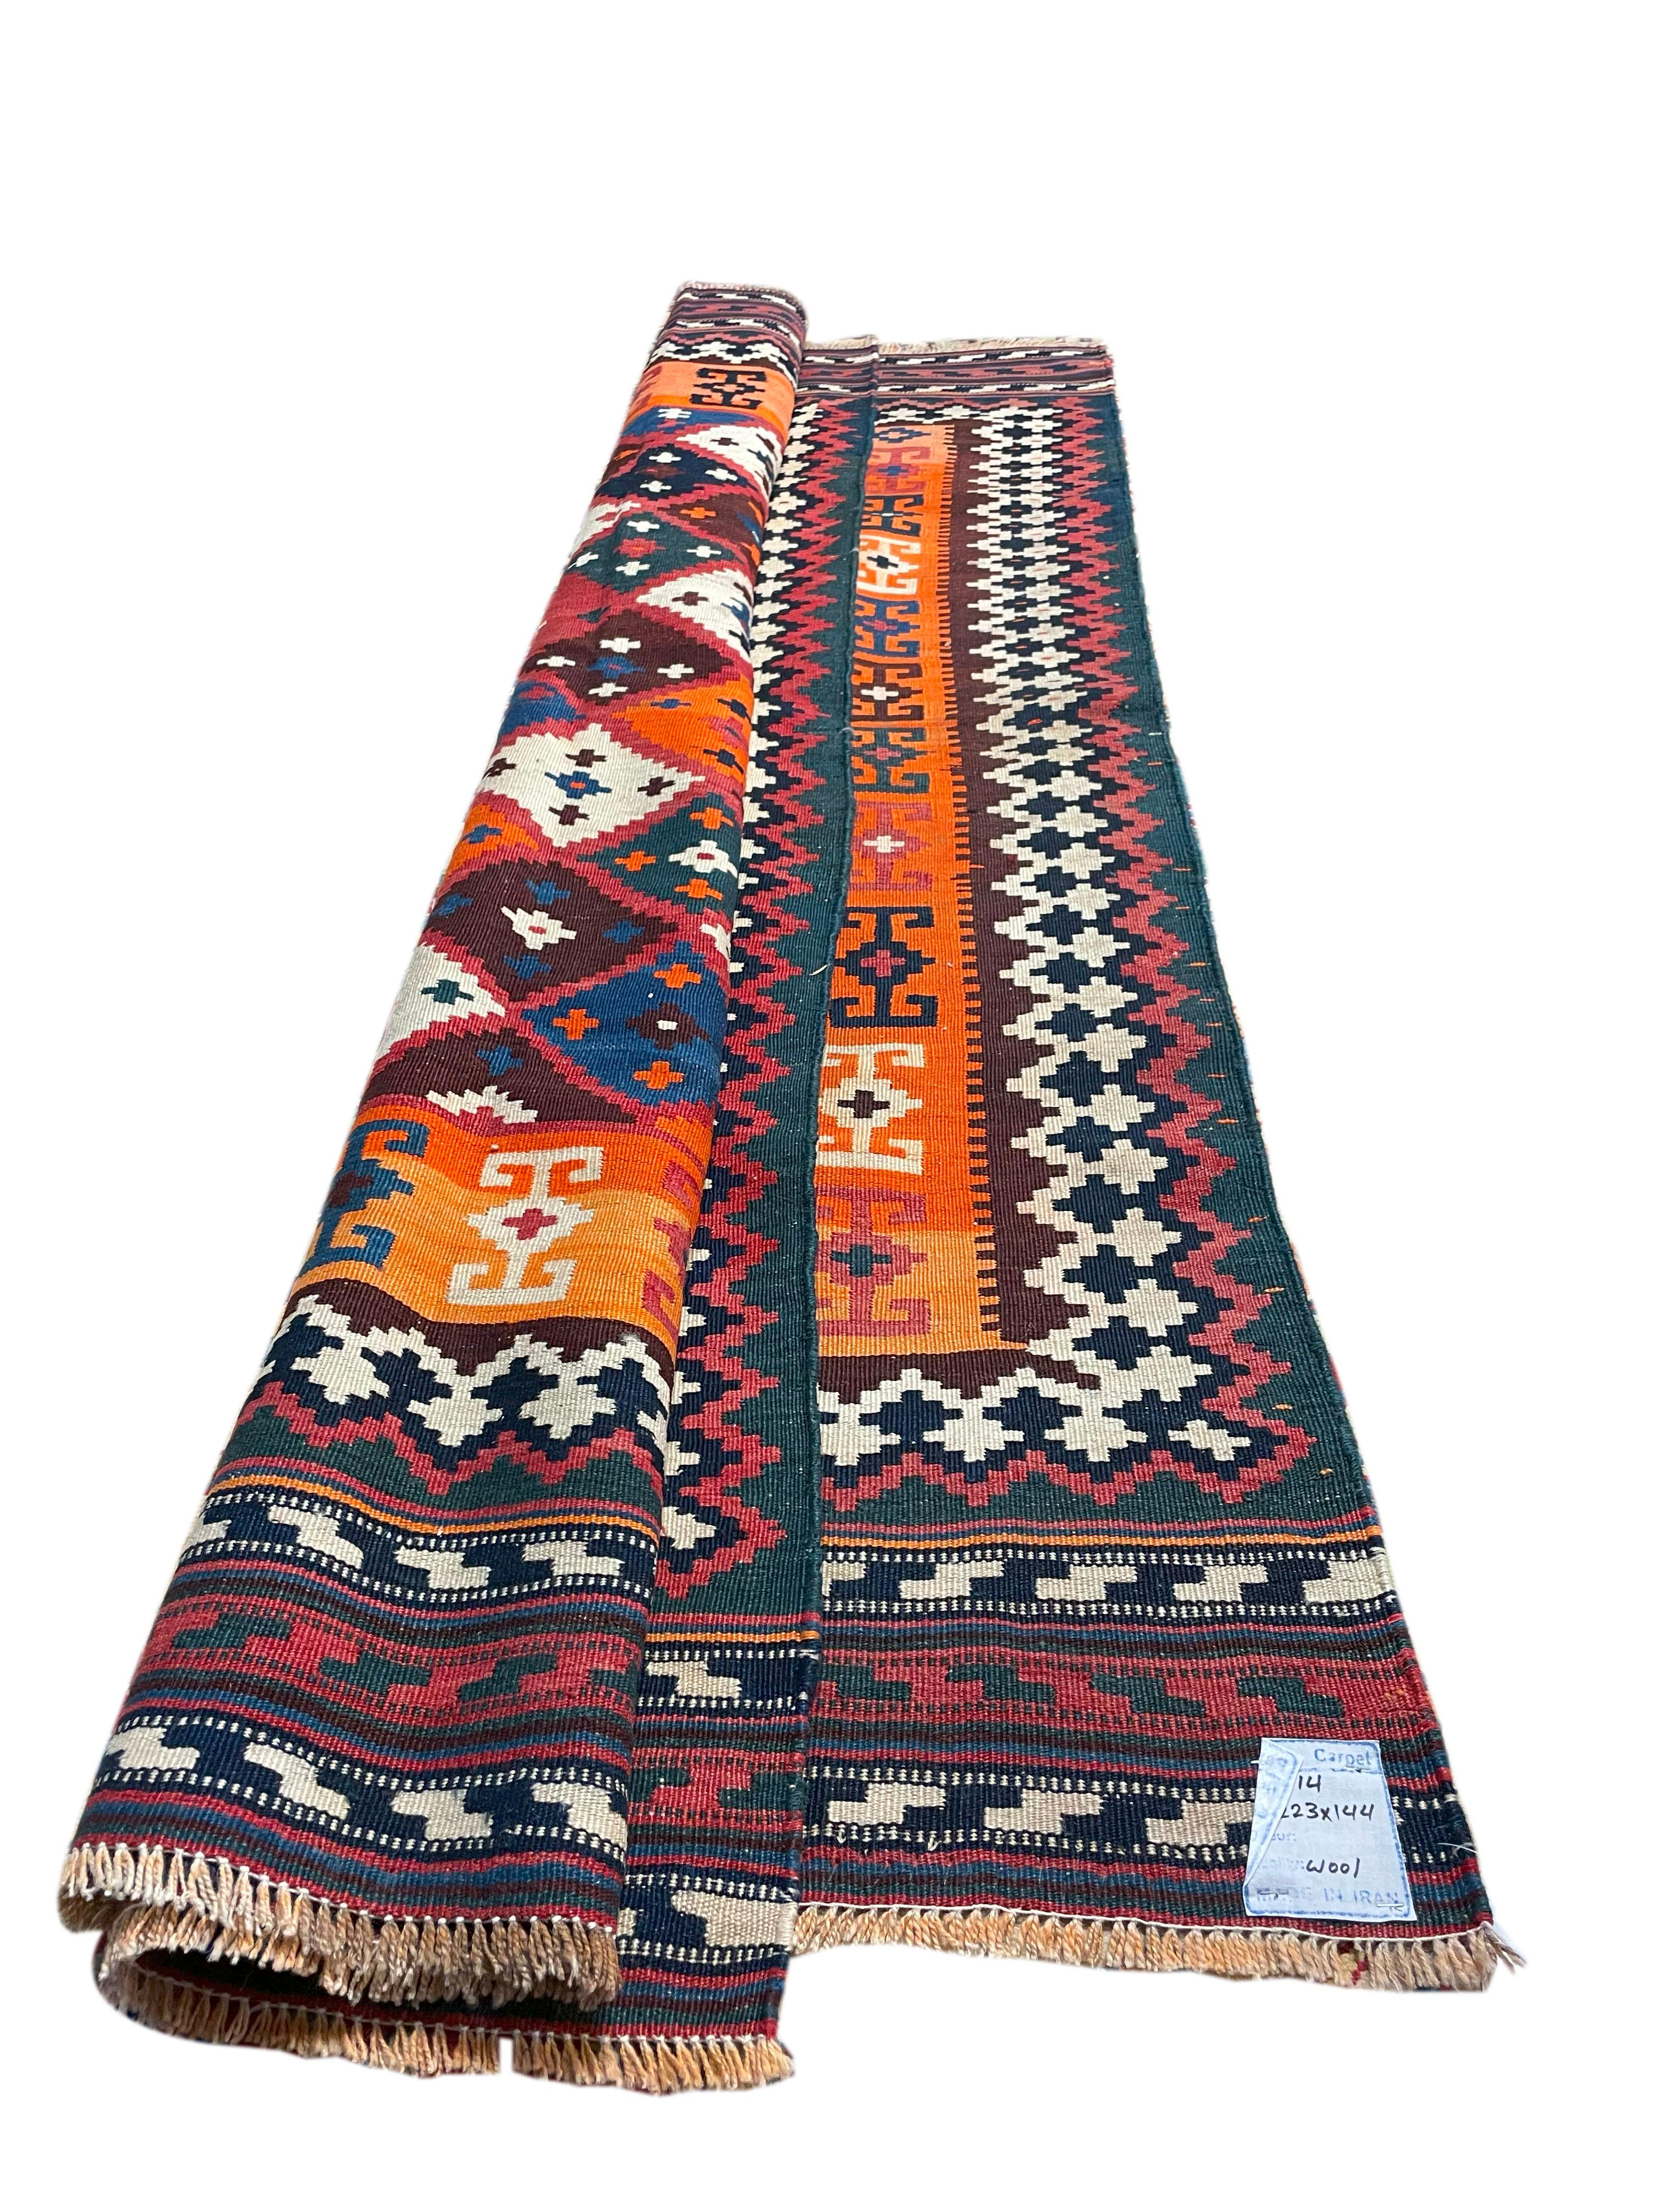 Incredible 50's Kashkooli Kilim. Perhaps one of our most intricate in this size, rich in motifs and borders. This beautiful piece is 100% tightly woven, naturally dyed wool. The Kashkooli subtribe of the Qashqai's weave the finest, most intricate